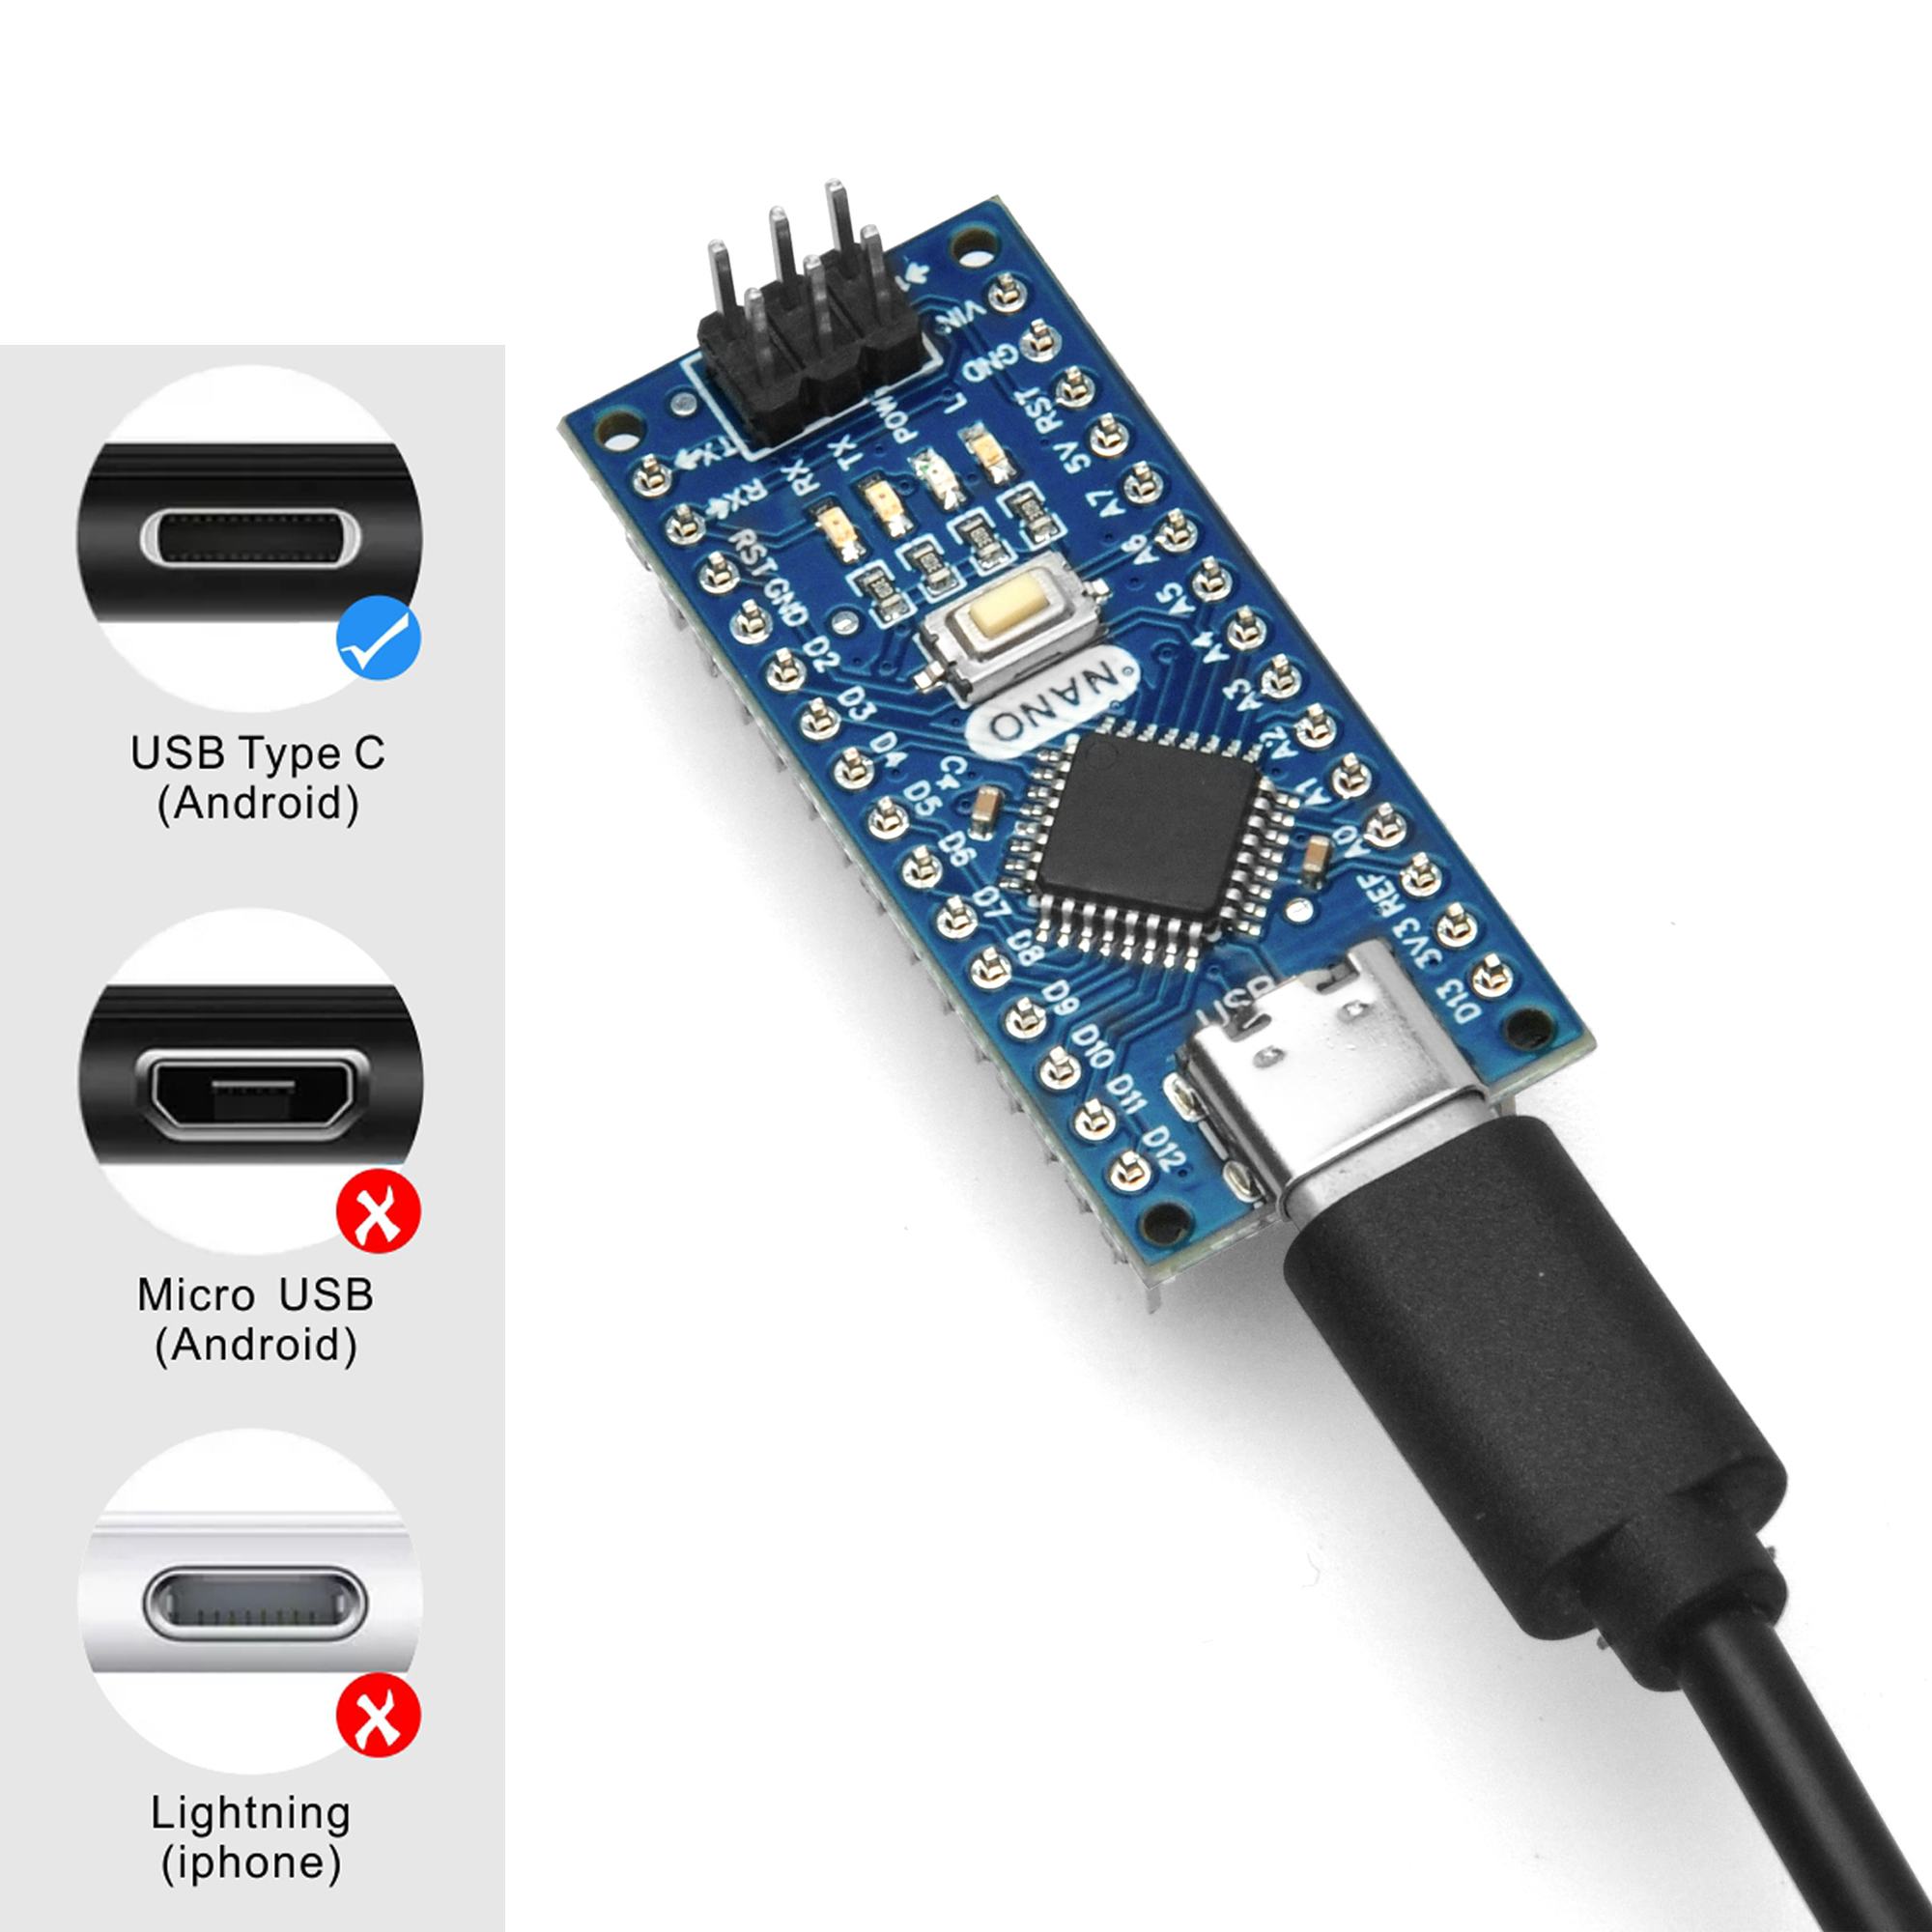 Lesson 1: Install Arduino Hardware Support Package for LGT-NANO